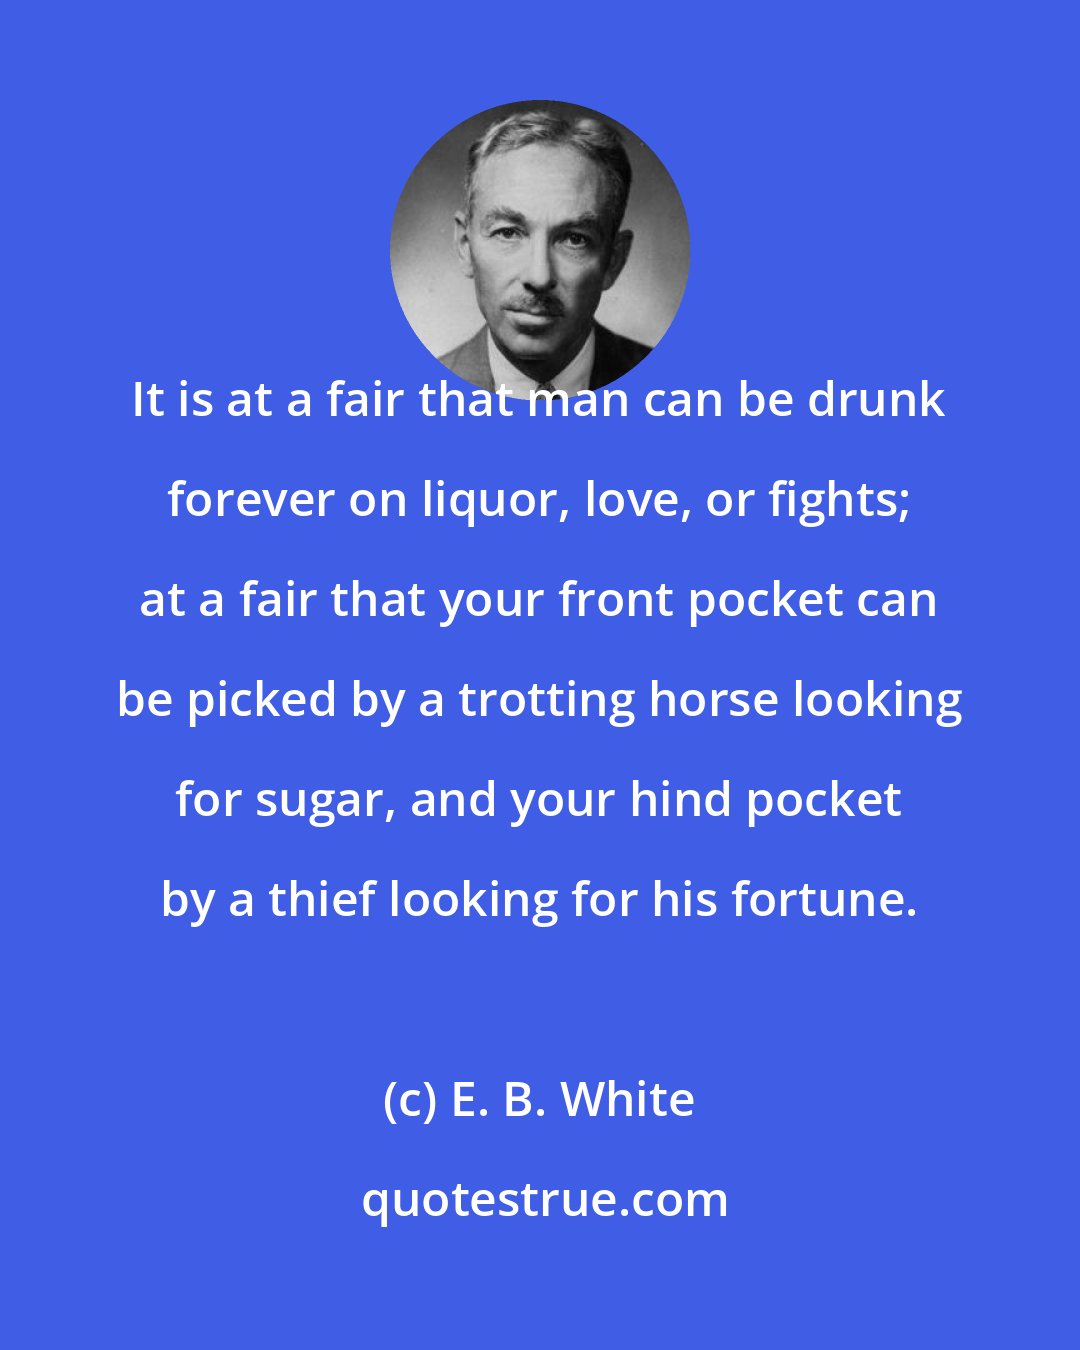 E. B. White: It is at a fair that man can be drunk forever on liquor, love, or fights; at a fair that your front pocket can be picked by a trotting horse looking for sugar, and your hind pocket by a thief looking for his fortune.